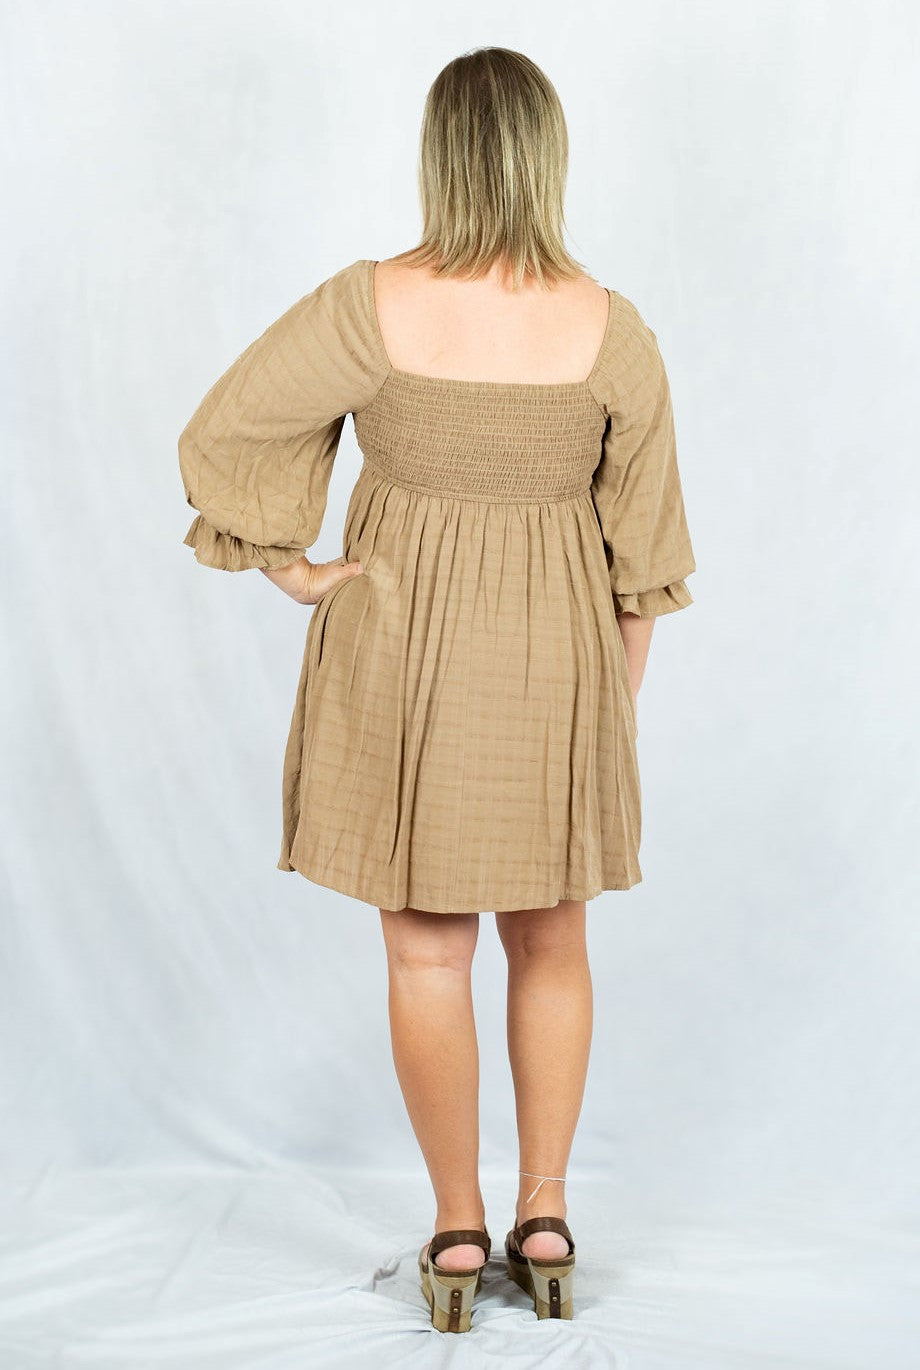 Square Neck Mini Dress with Ruffle Sleeves by Entro Clothing